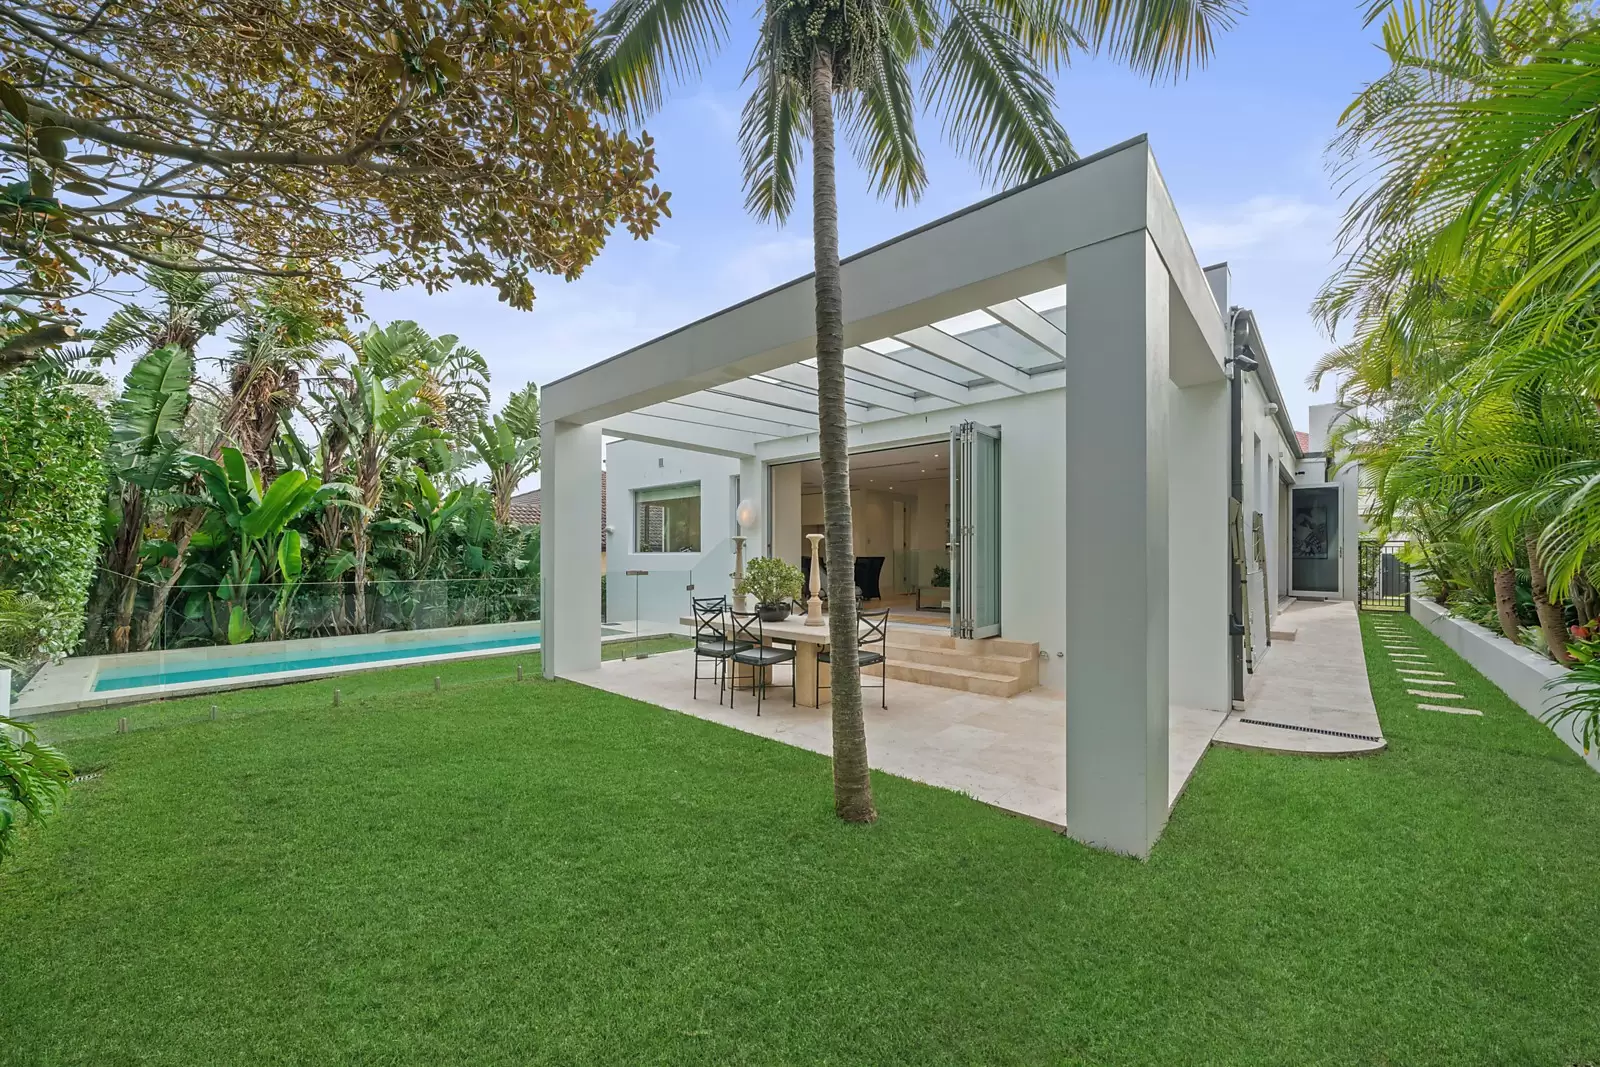 Photo #5: 3 Myall Avenue, Vaucluse - Sold by Sydney Sotheby's International Realty